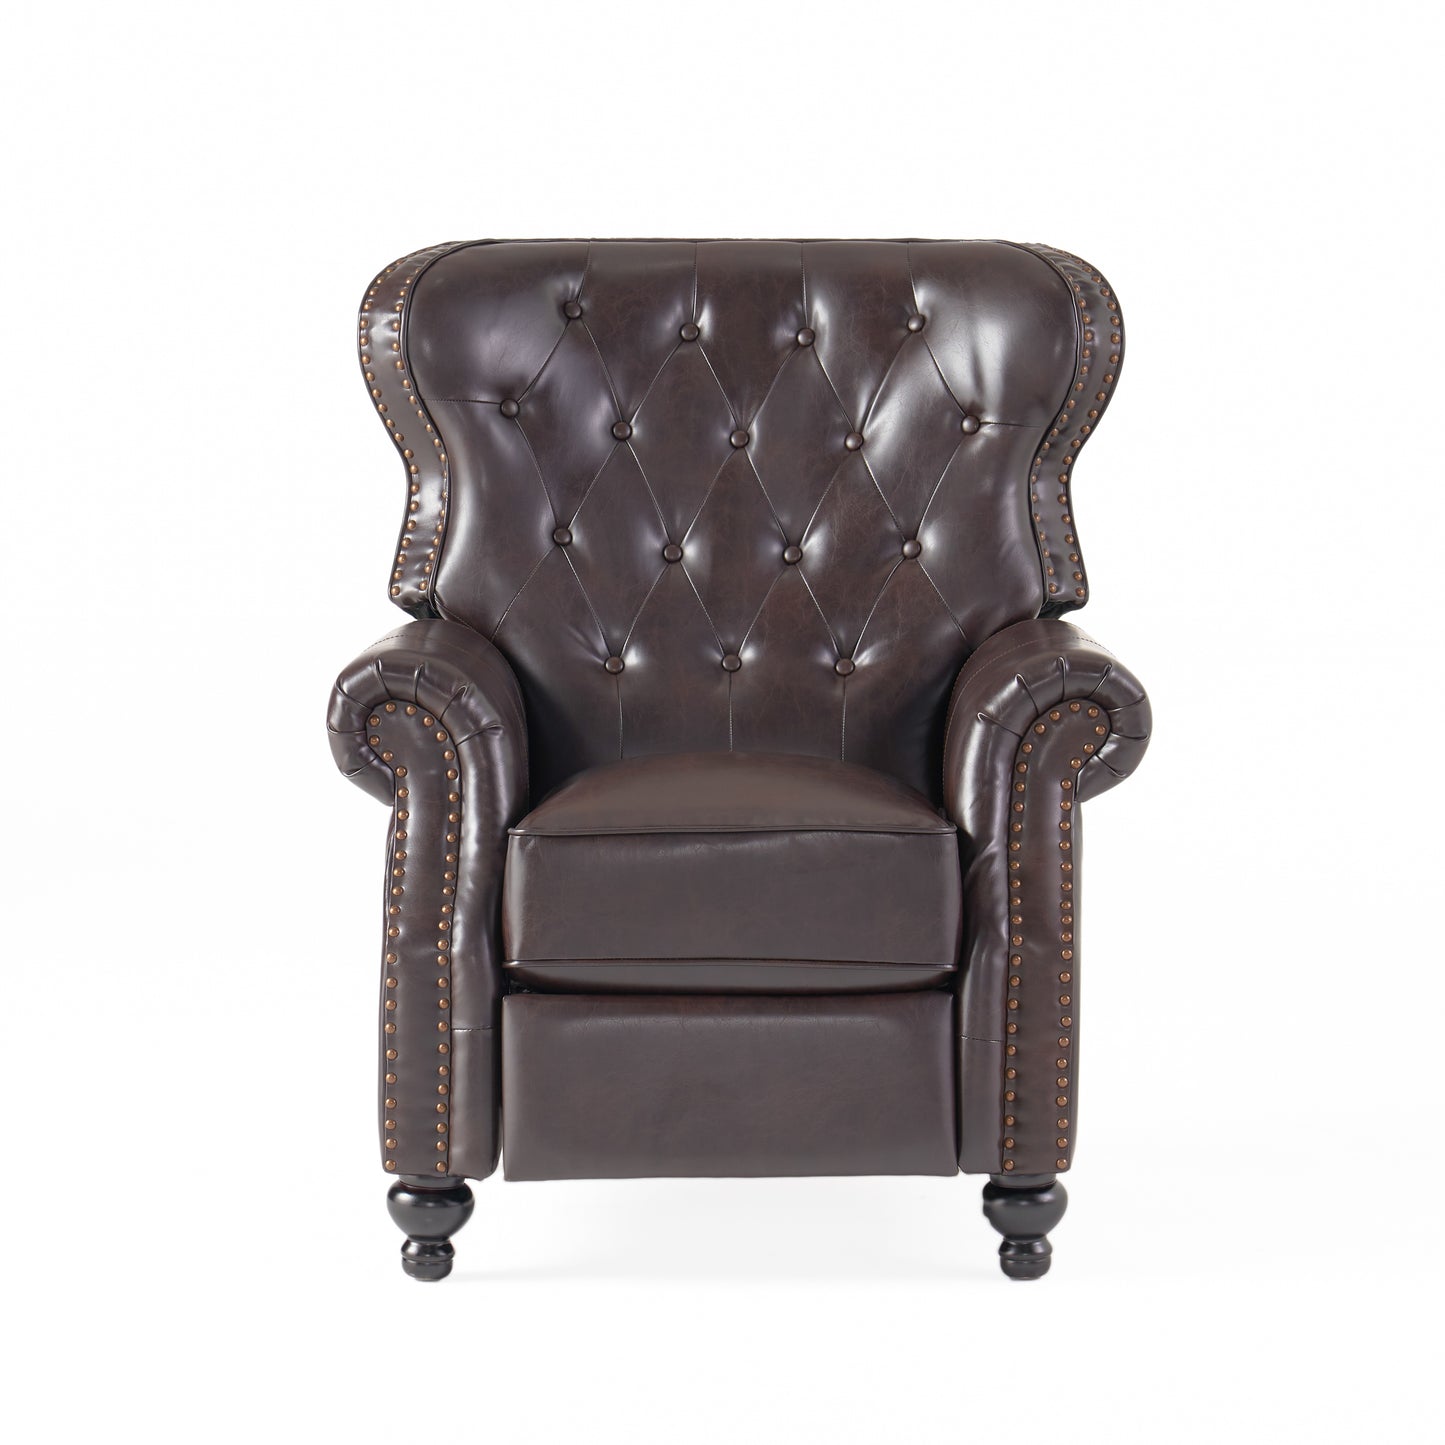 Walder Contemporary Tufted Recliner with Nailhead Trim, Brown and Dark Brown